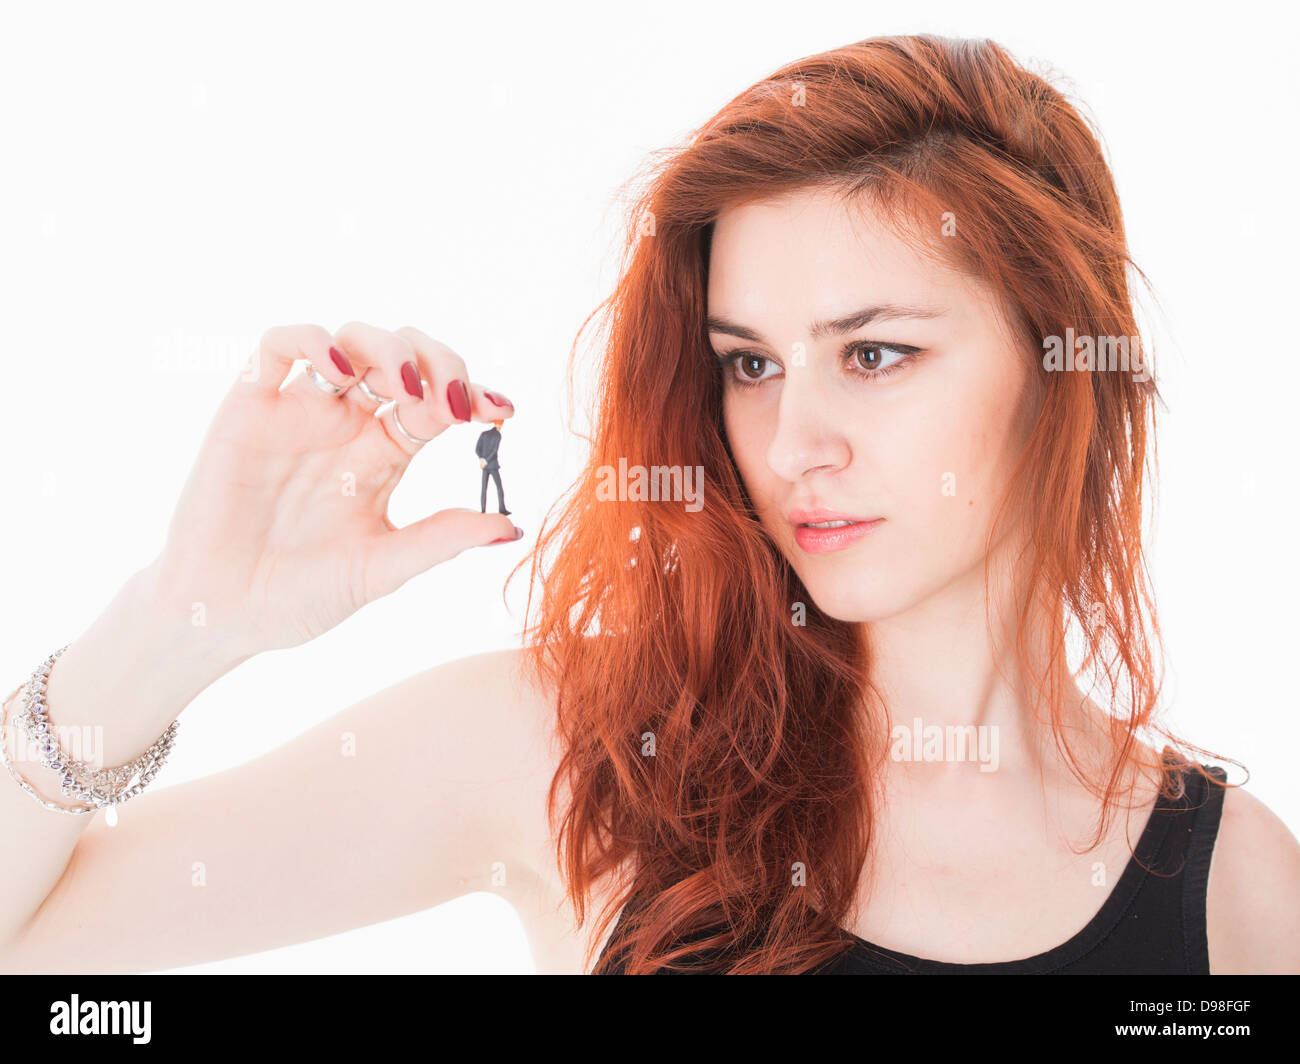 Young red haired woman in her 20s holding miniature figurine of businessman. Stock Photo